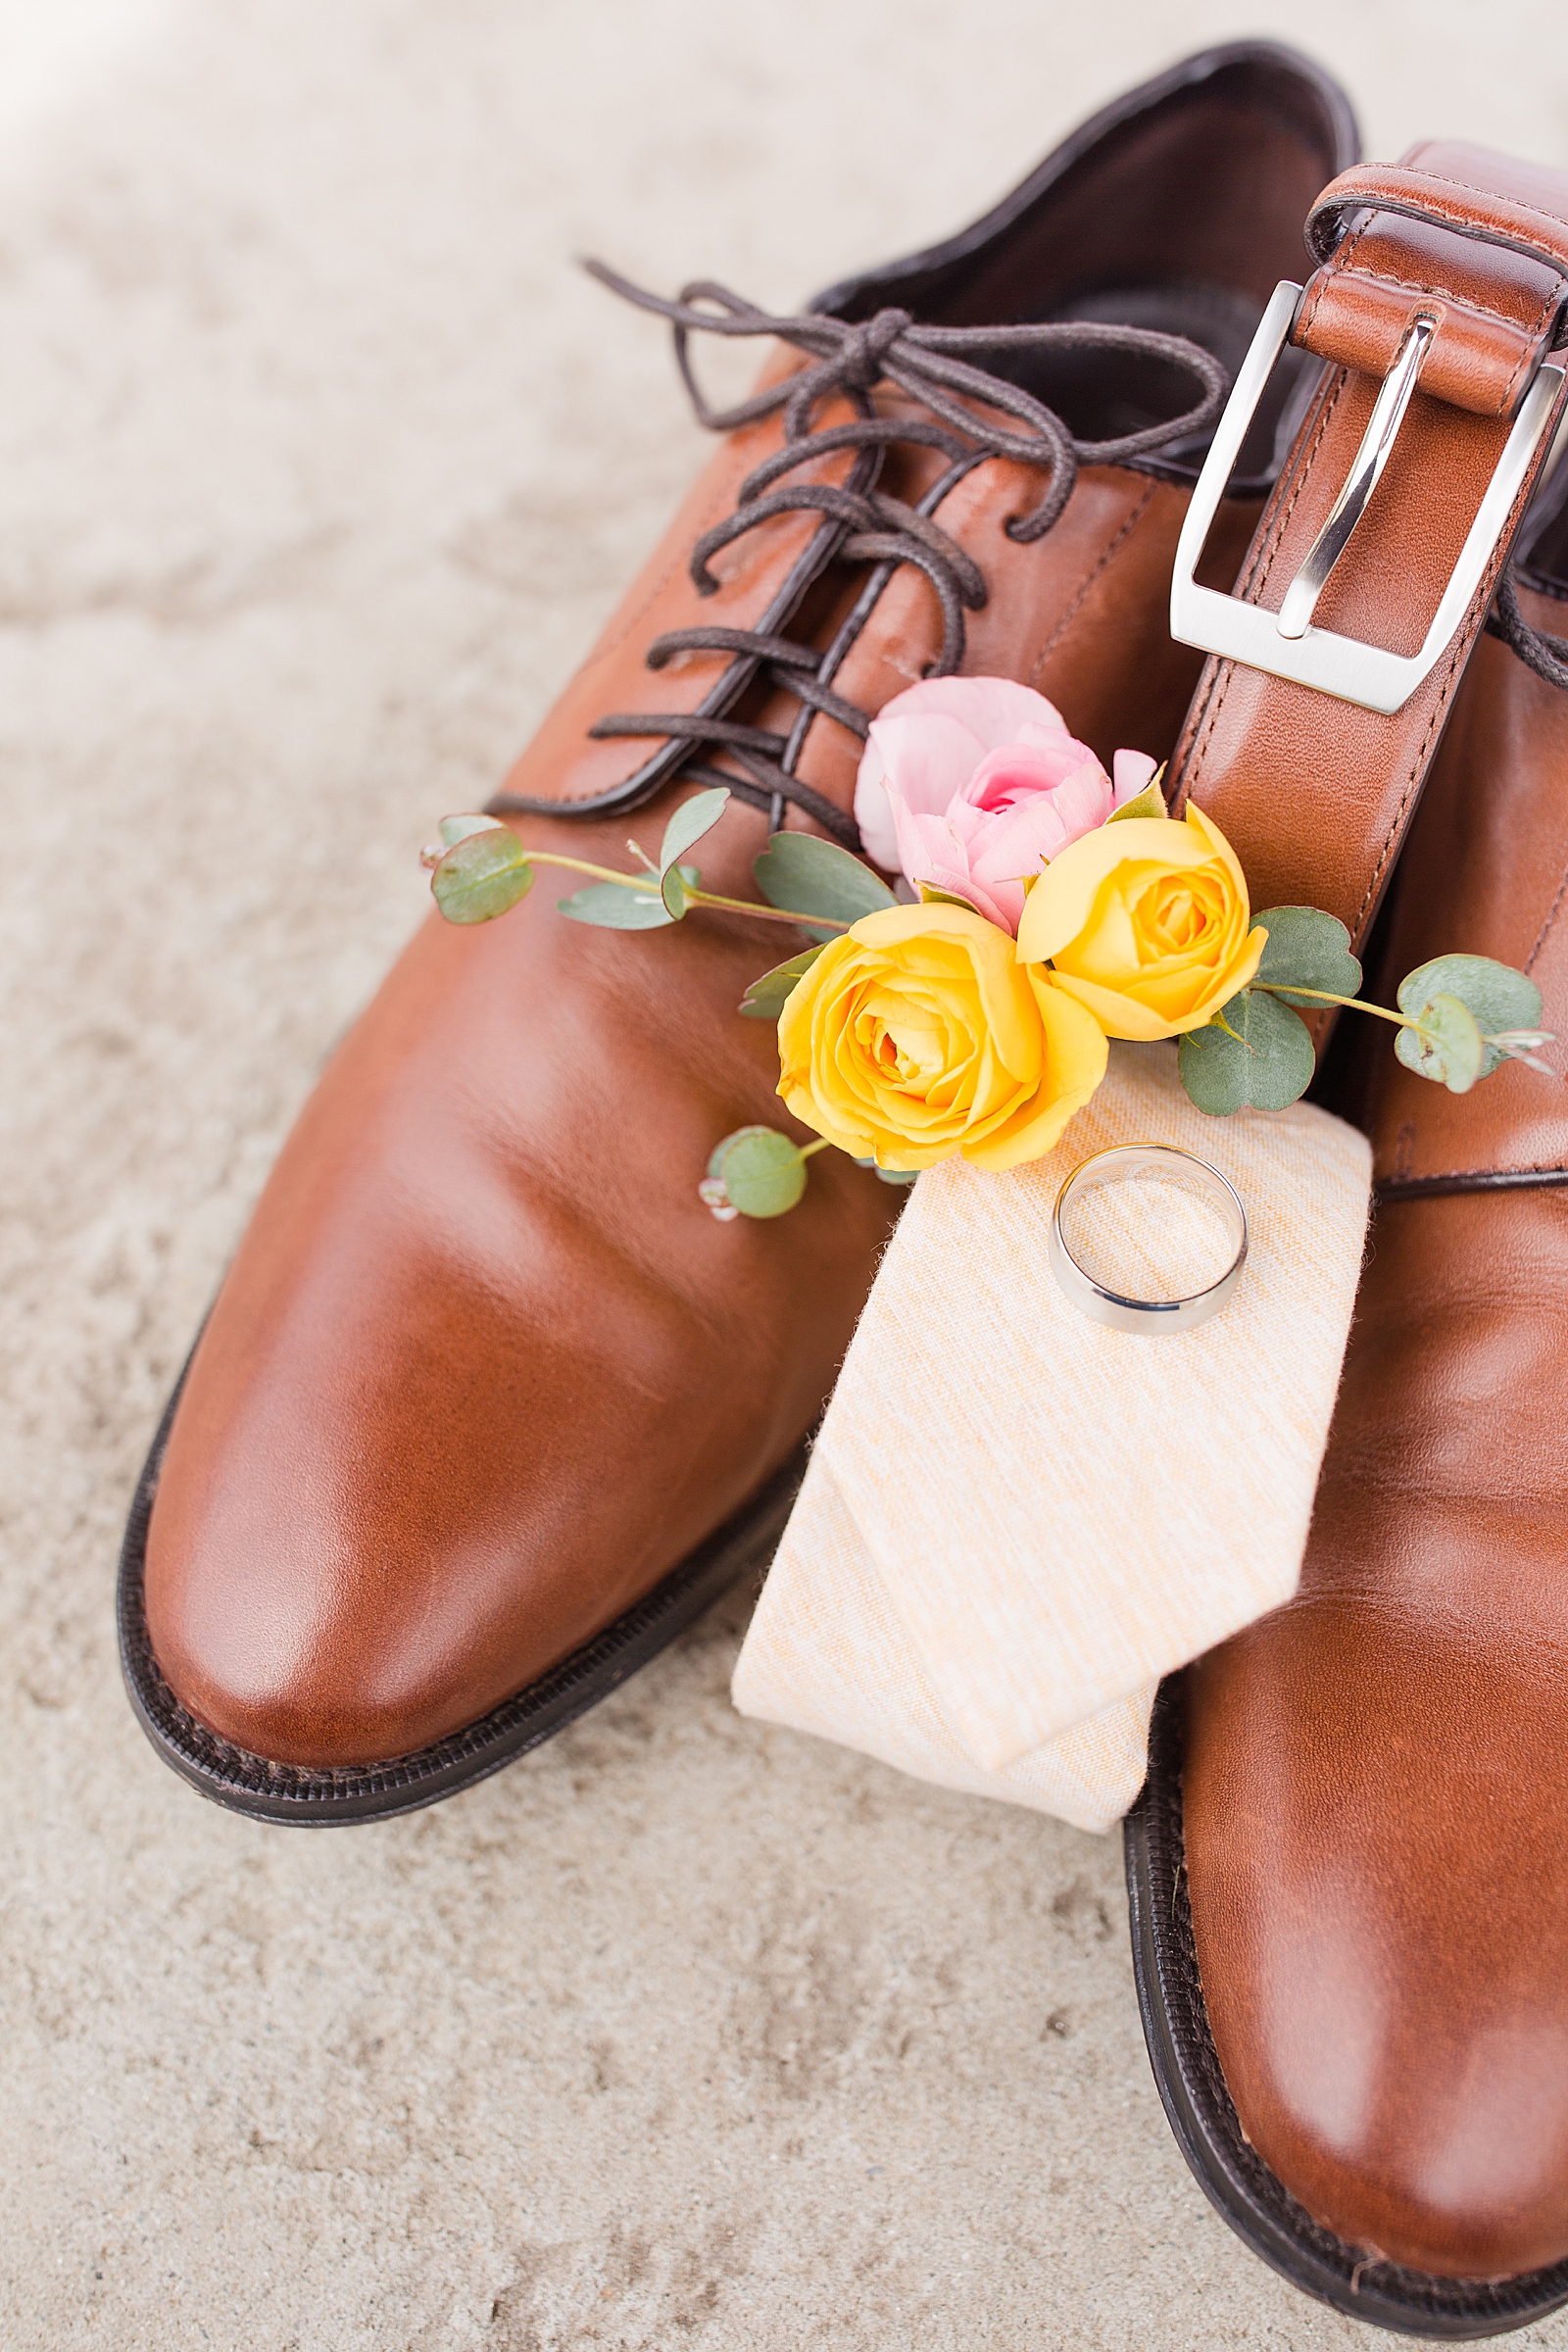 Hackney Warehouse Wedding Details of Grooms Ring Shoes Belt Tie and Boutonniere Photo